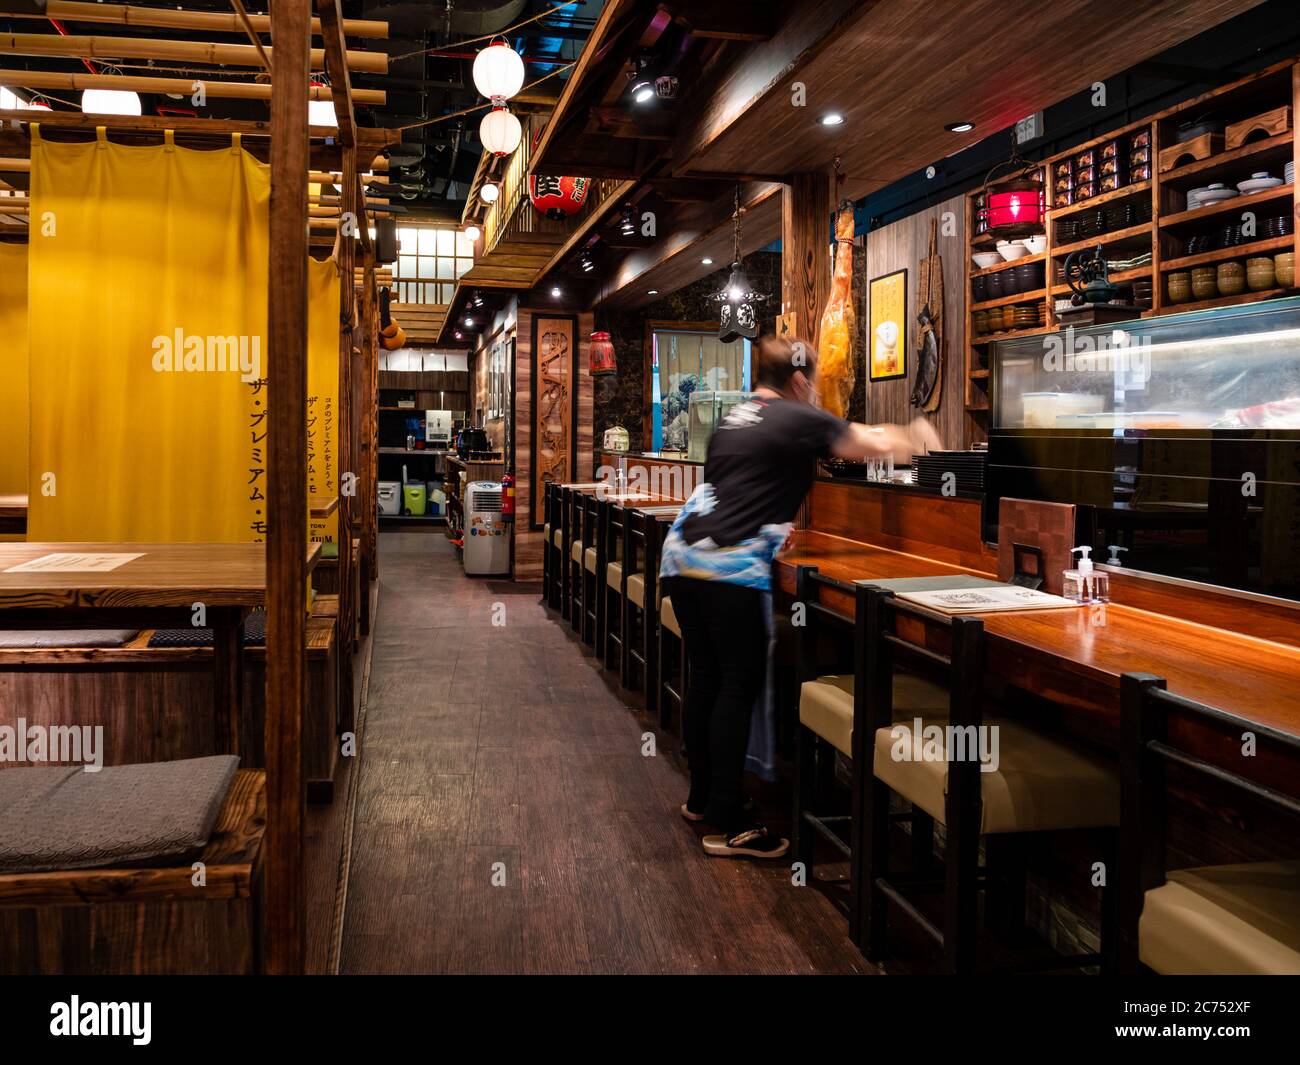 SINGAPORE – JULY 08 – A waitress cleans the empty tables at The Public Izakaya Japanese restaurant in Tanjong Pagar, Singapore in the evening. Busines Stock Photo